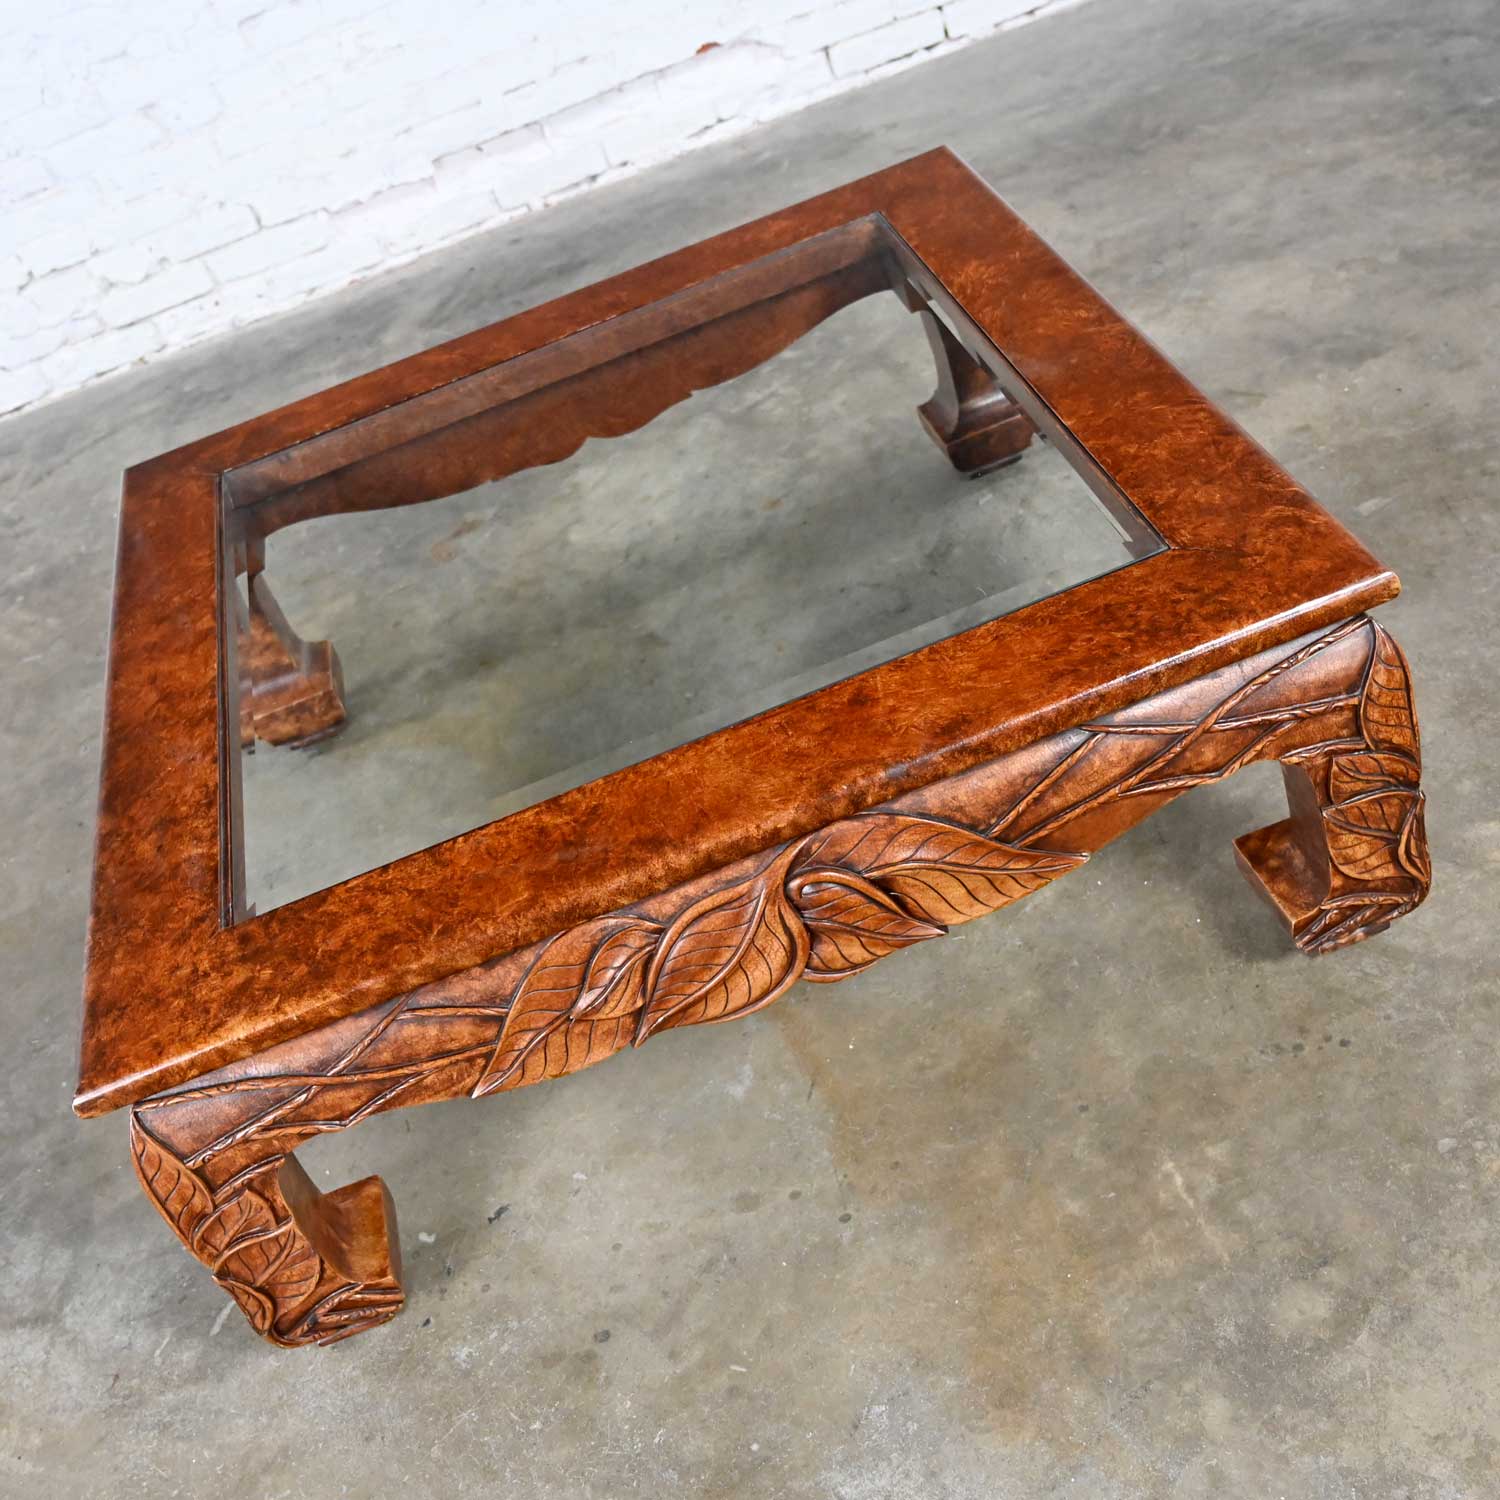 Vintage Chinoiserie Ming Style Chow Leg Carved Square Coffee Table by Casa Bique Ltd & Attr to Robert Marcius